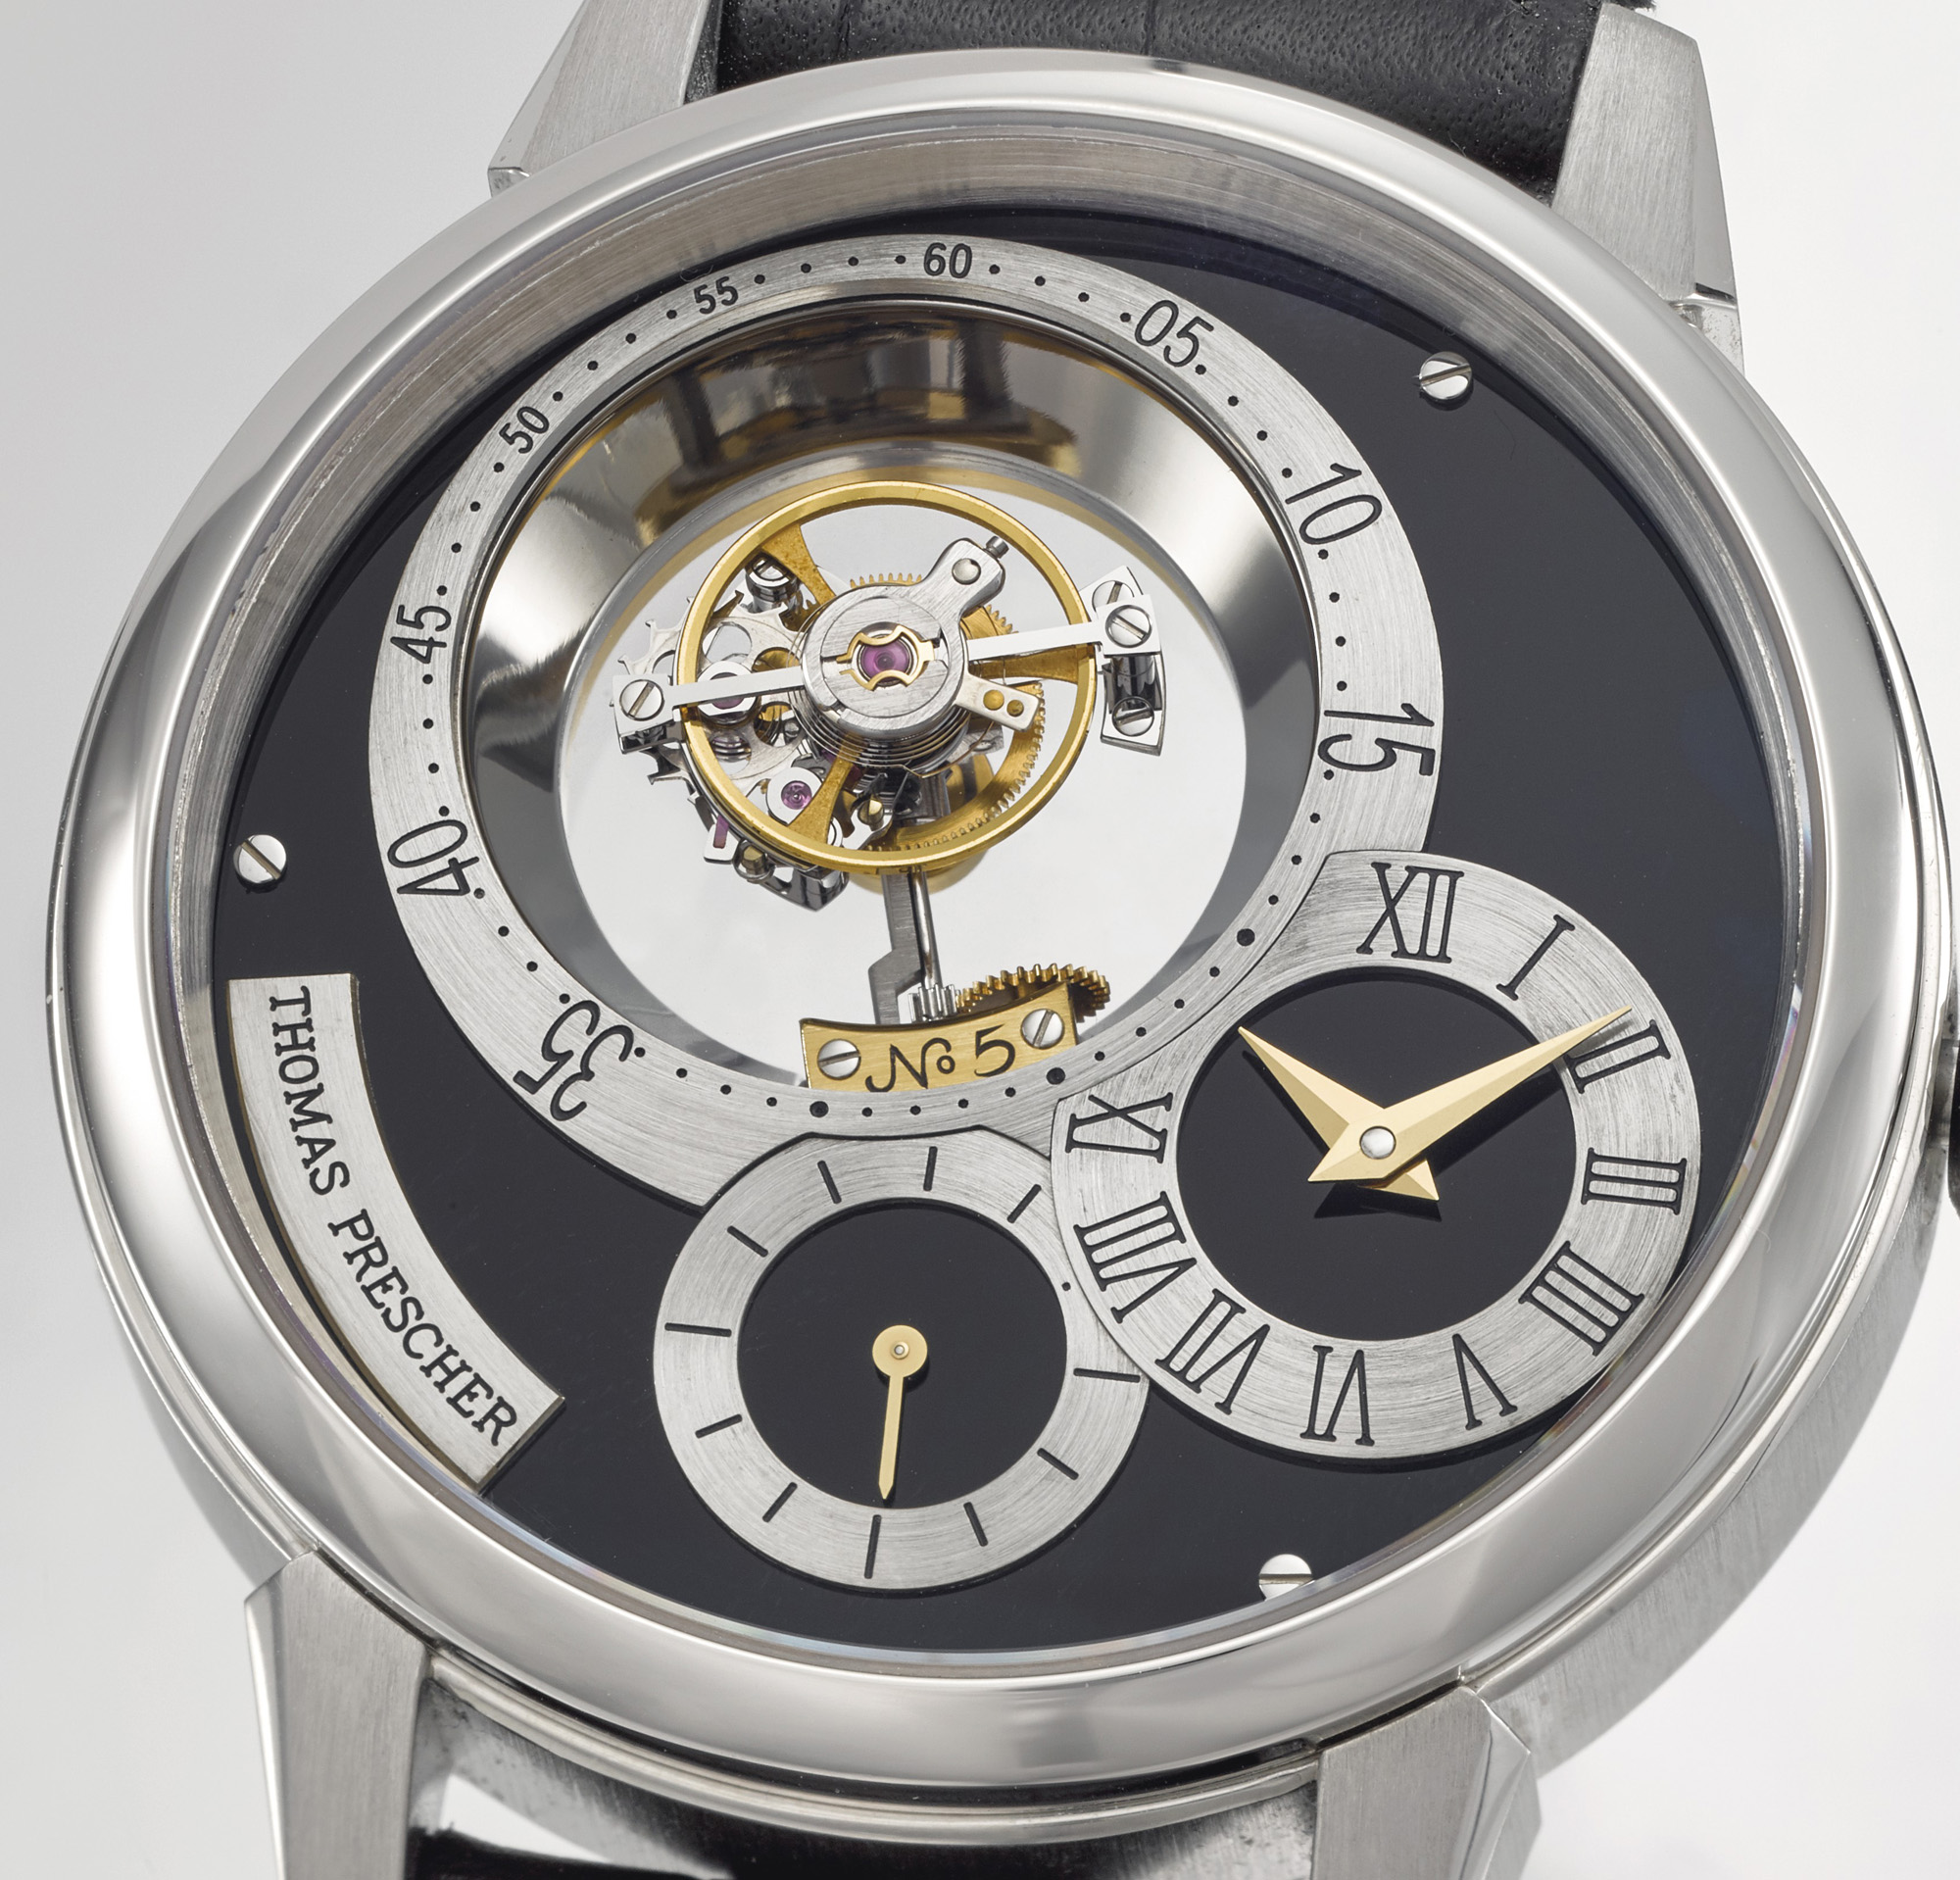 Thomas Prescher Tourbillon This is the first Thomas Prescher Tourbillon to be offered at public auction. Consigned by the original owner, the watch features a triple axis flying tourbillon with a constant force mechanism. It is also the first wristwatch to feature a constant force mechanism within the tourbillon carriage itself.